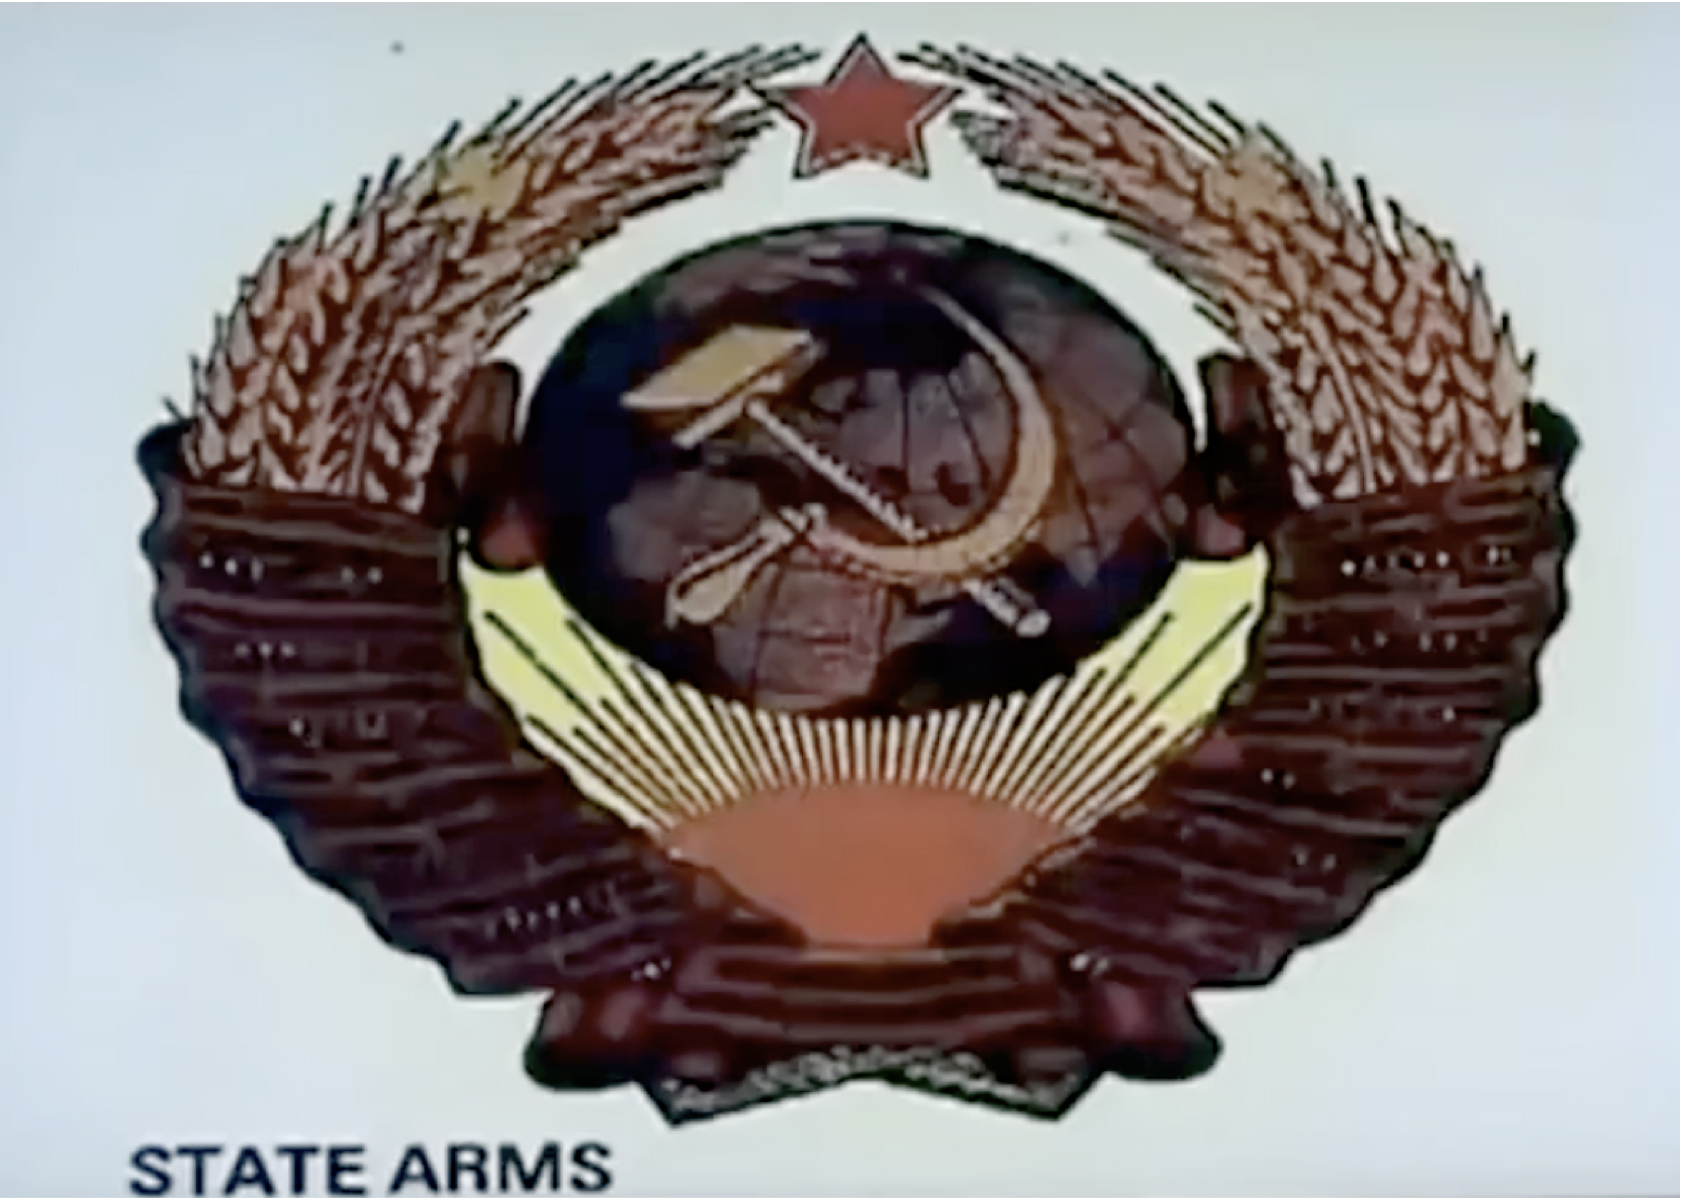 USSR State Arms.jpg